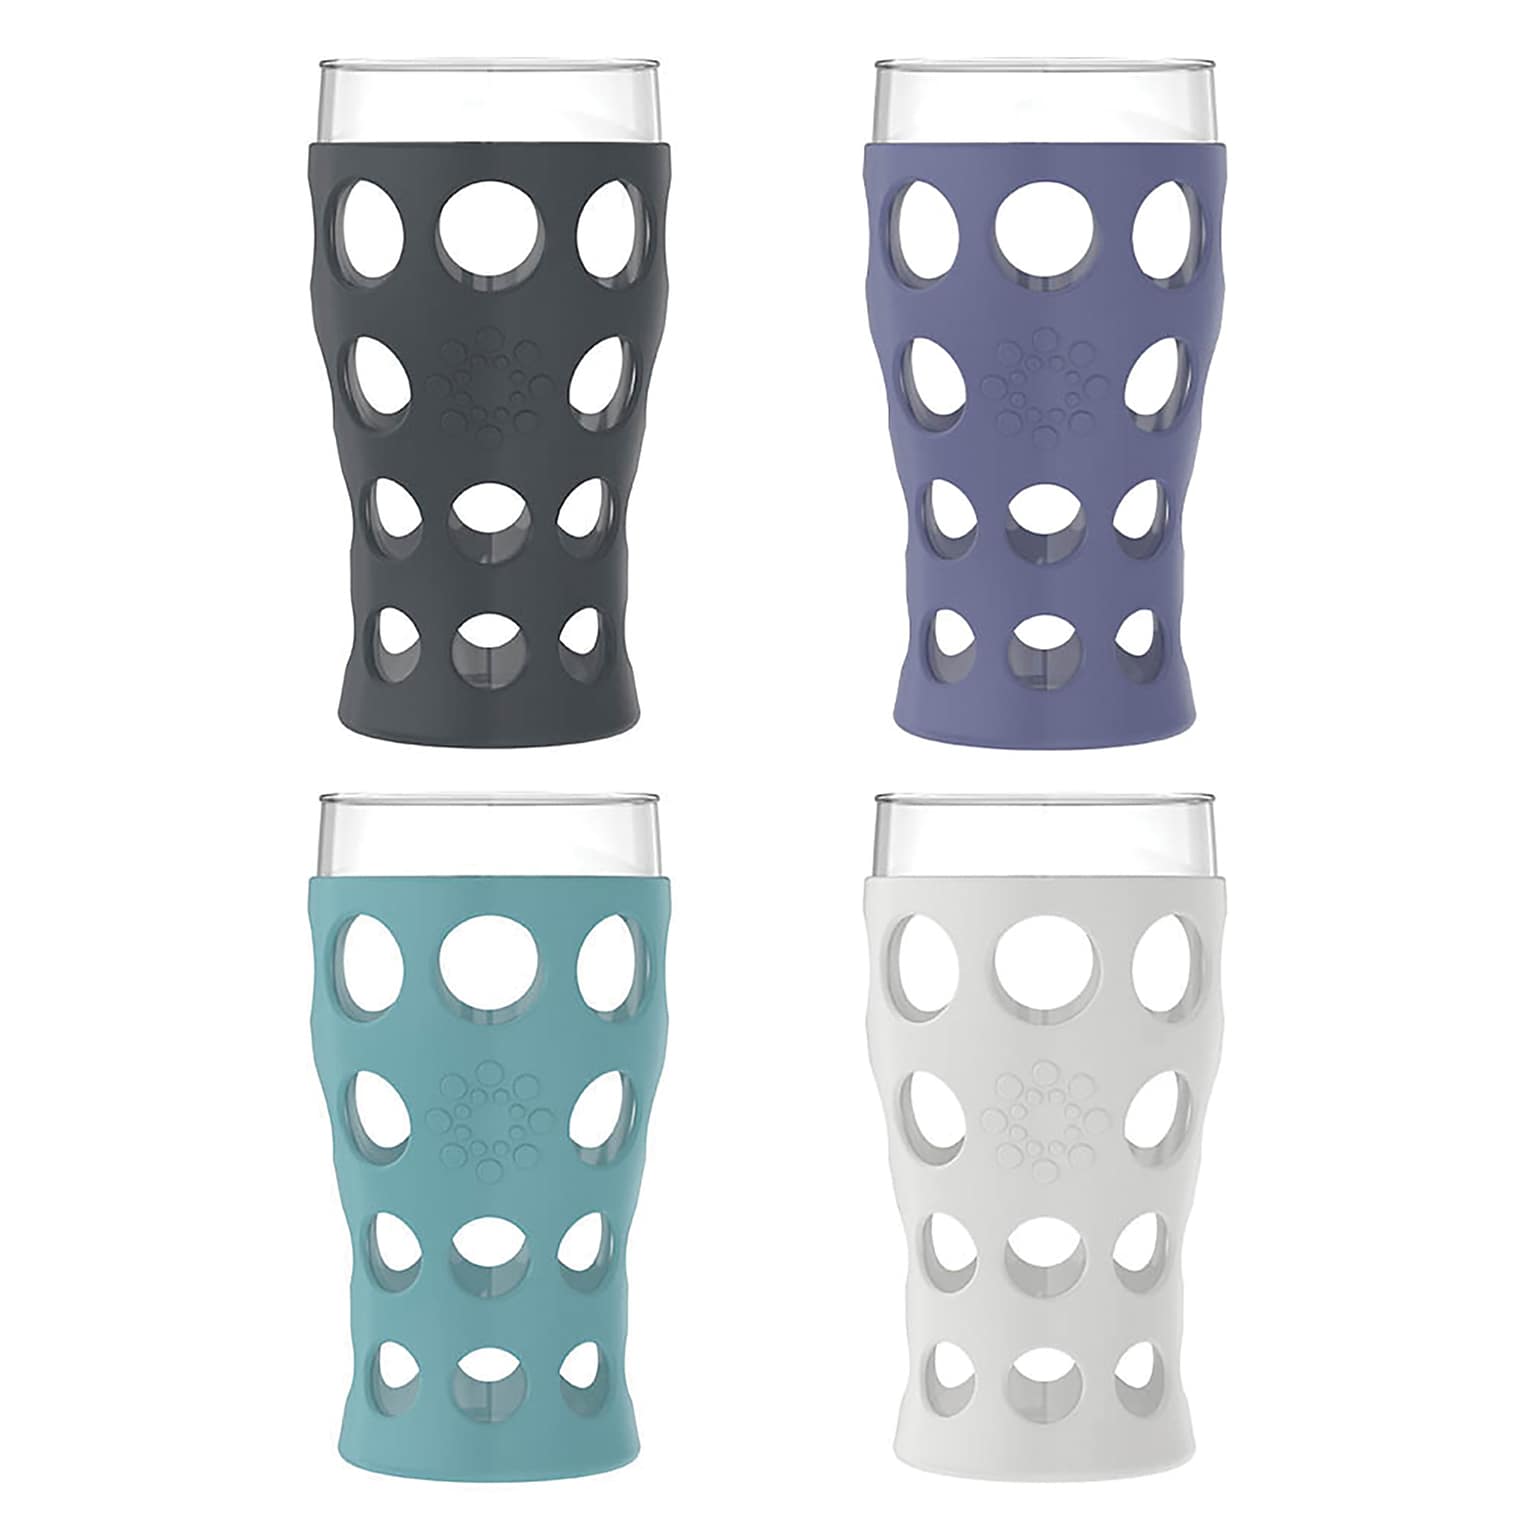 Lifefactory Cup with Protective Silicone Sleeves, Assorted Colors, 20 oz. (LG721MC4)